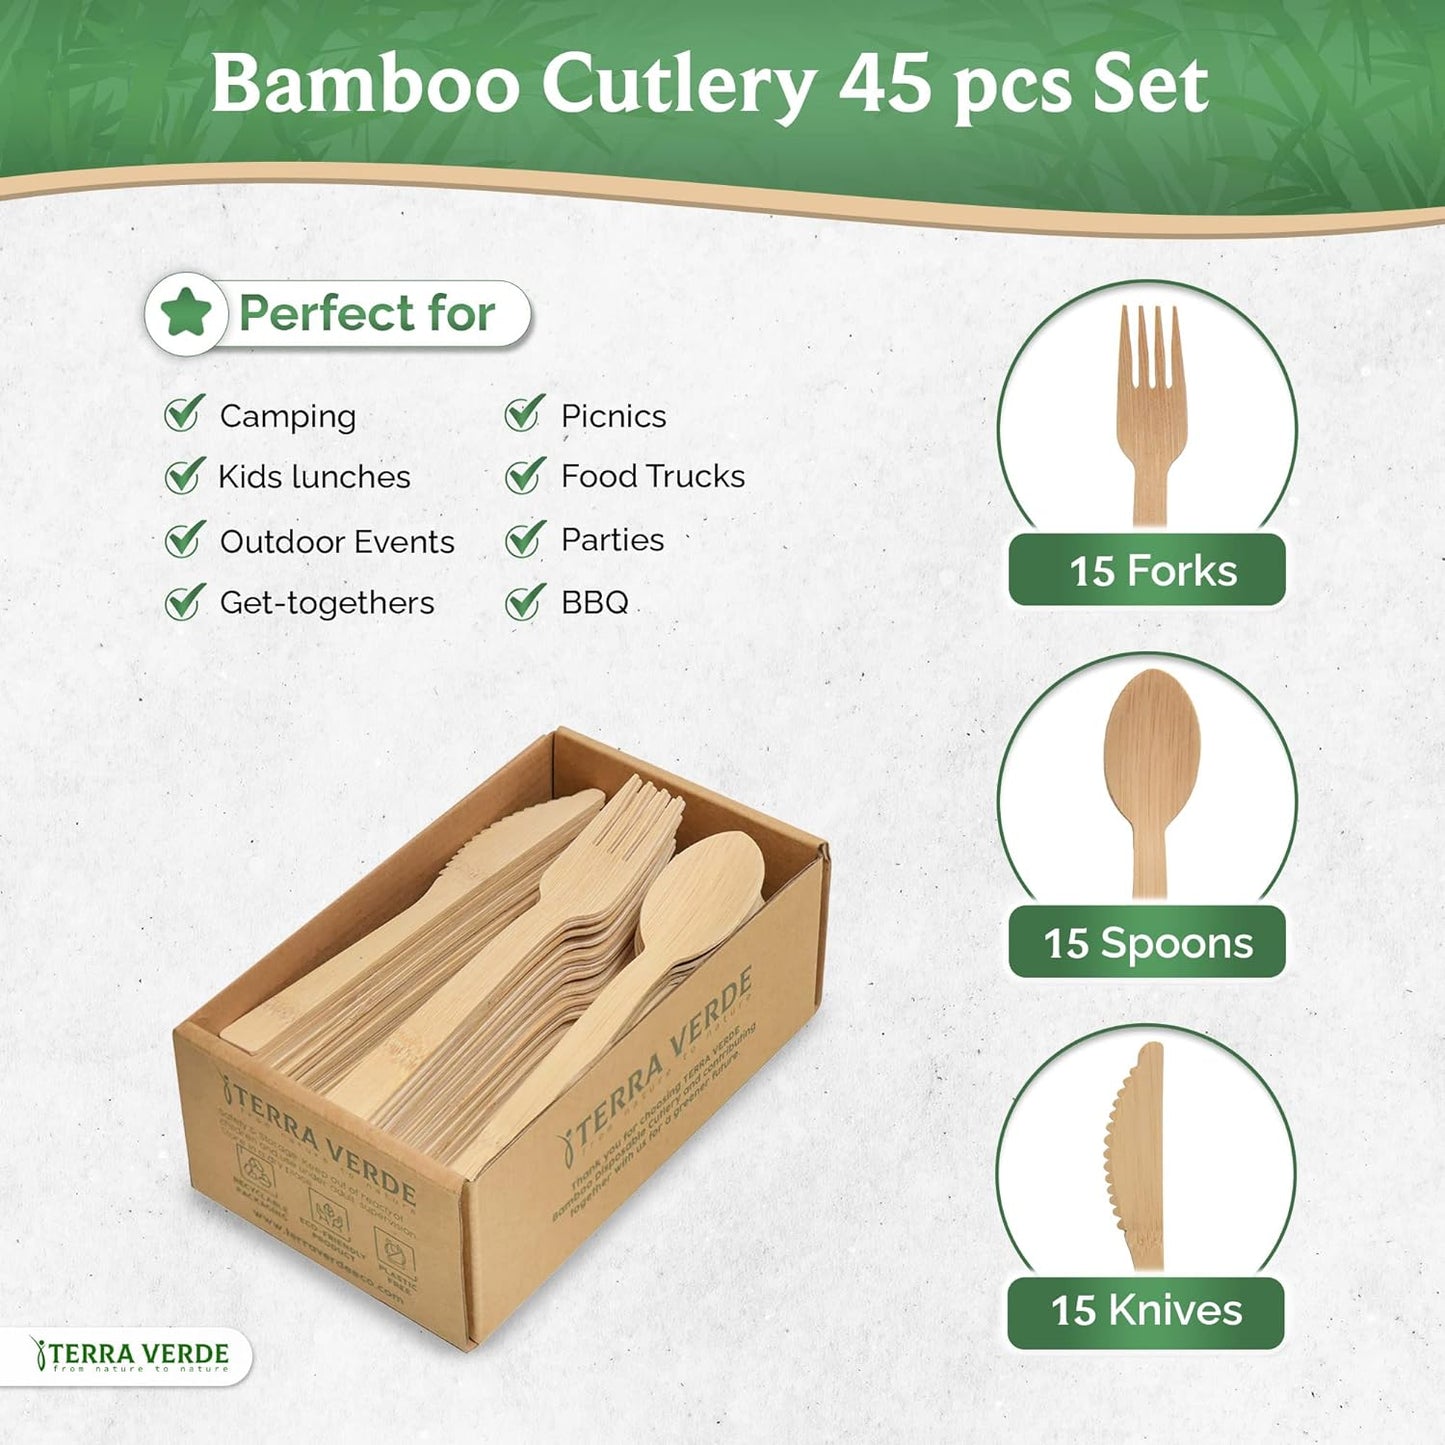 Bamboo cutlery set of 45 pieces by terra verde